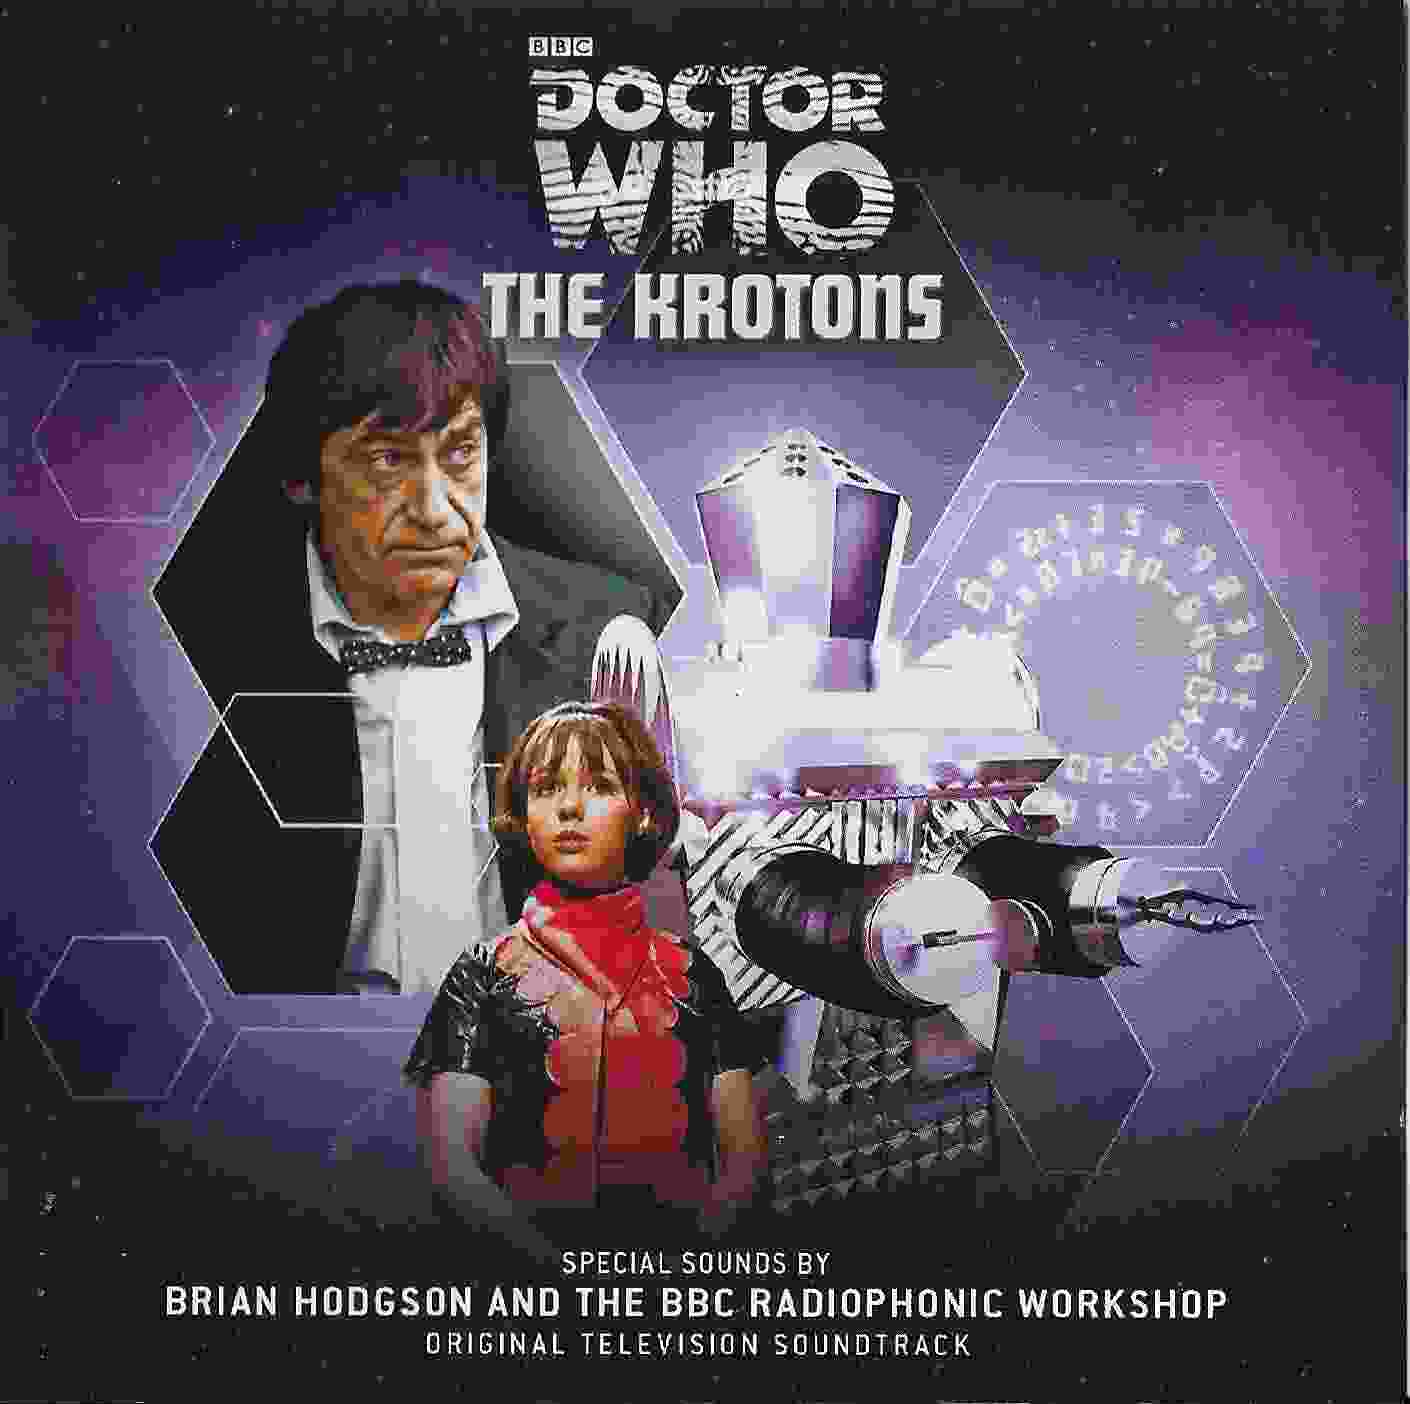 Picture of Doctor Who - The Krotons by artist Brian Hodgson and the BBC Radiophonic Workshop from the BBC cds - Records and Tapes library